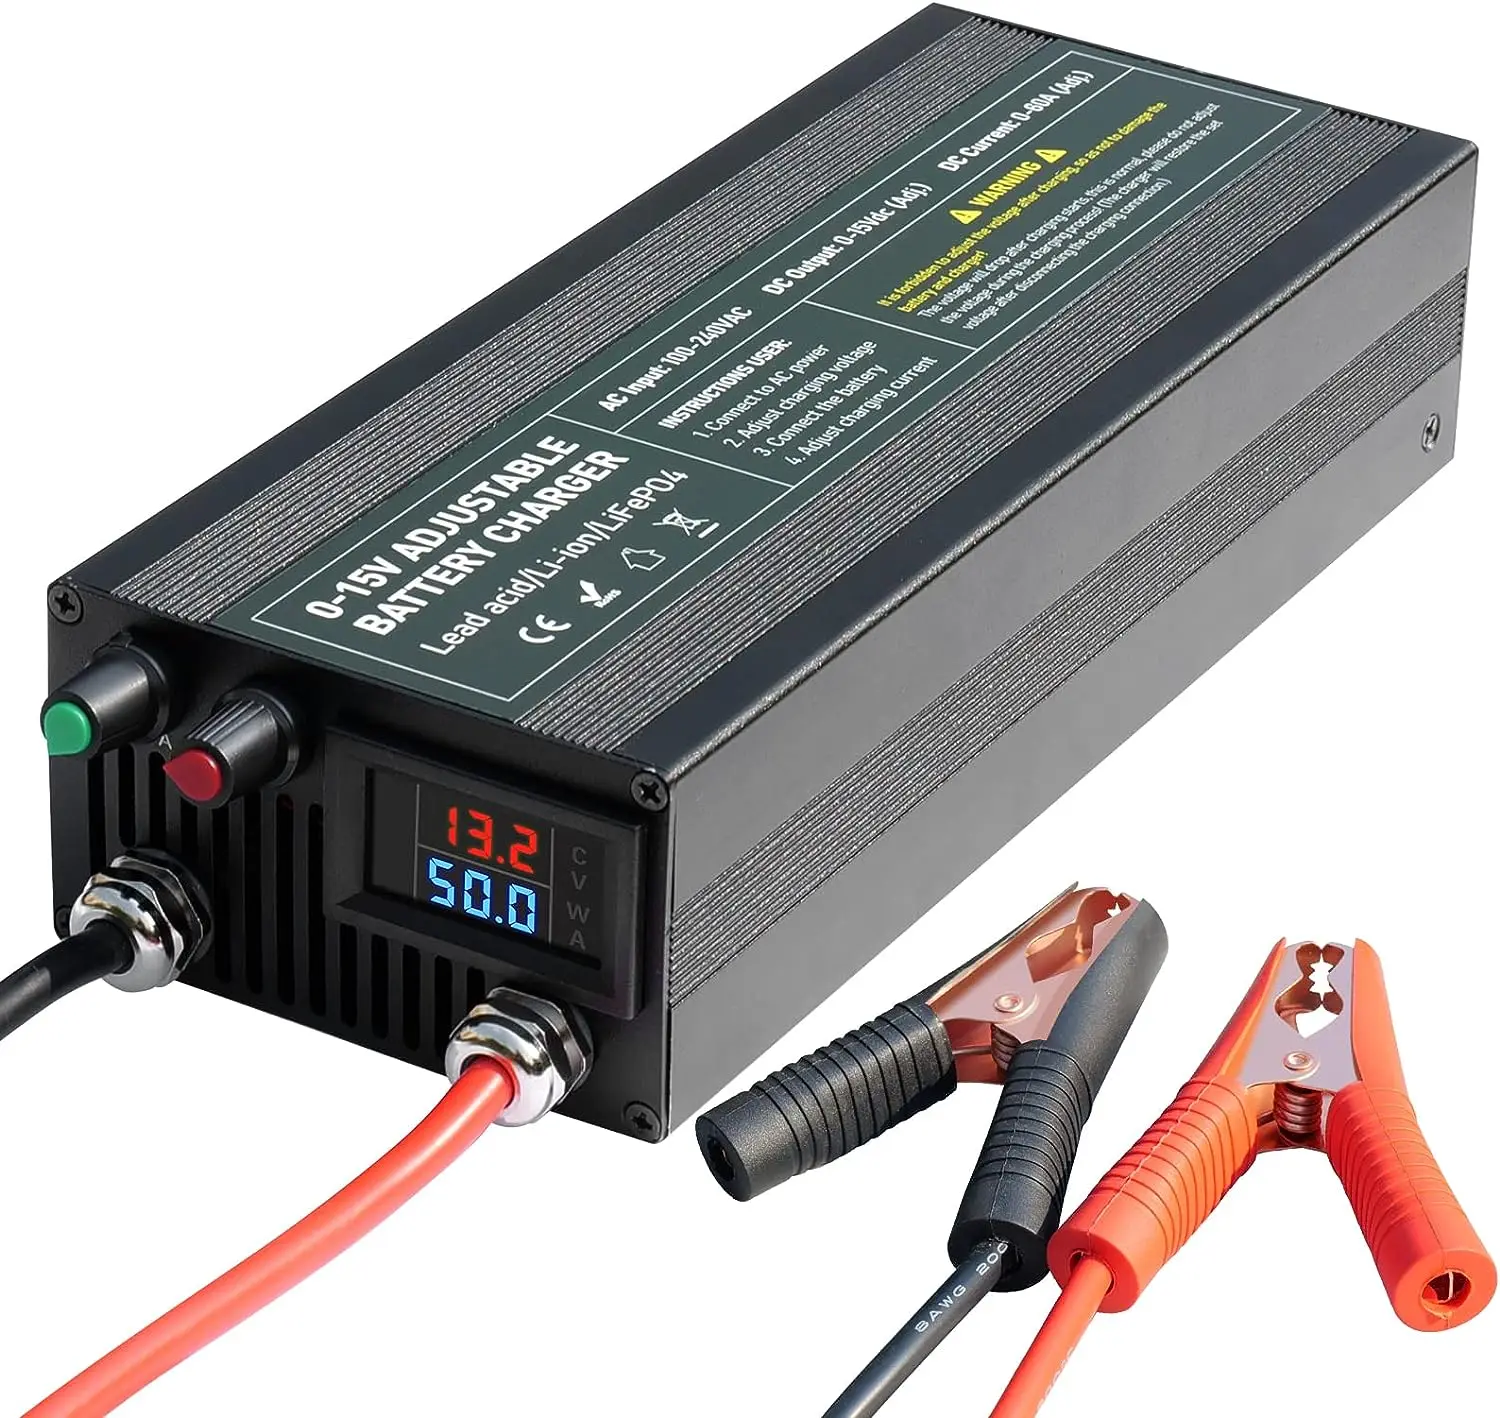 

12V High Power Lifepo4 Charger Smart Battery Charger Maintainer with 0-15V Adjustable Current and Voltage, 12.6V Portable Power